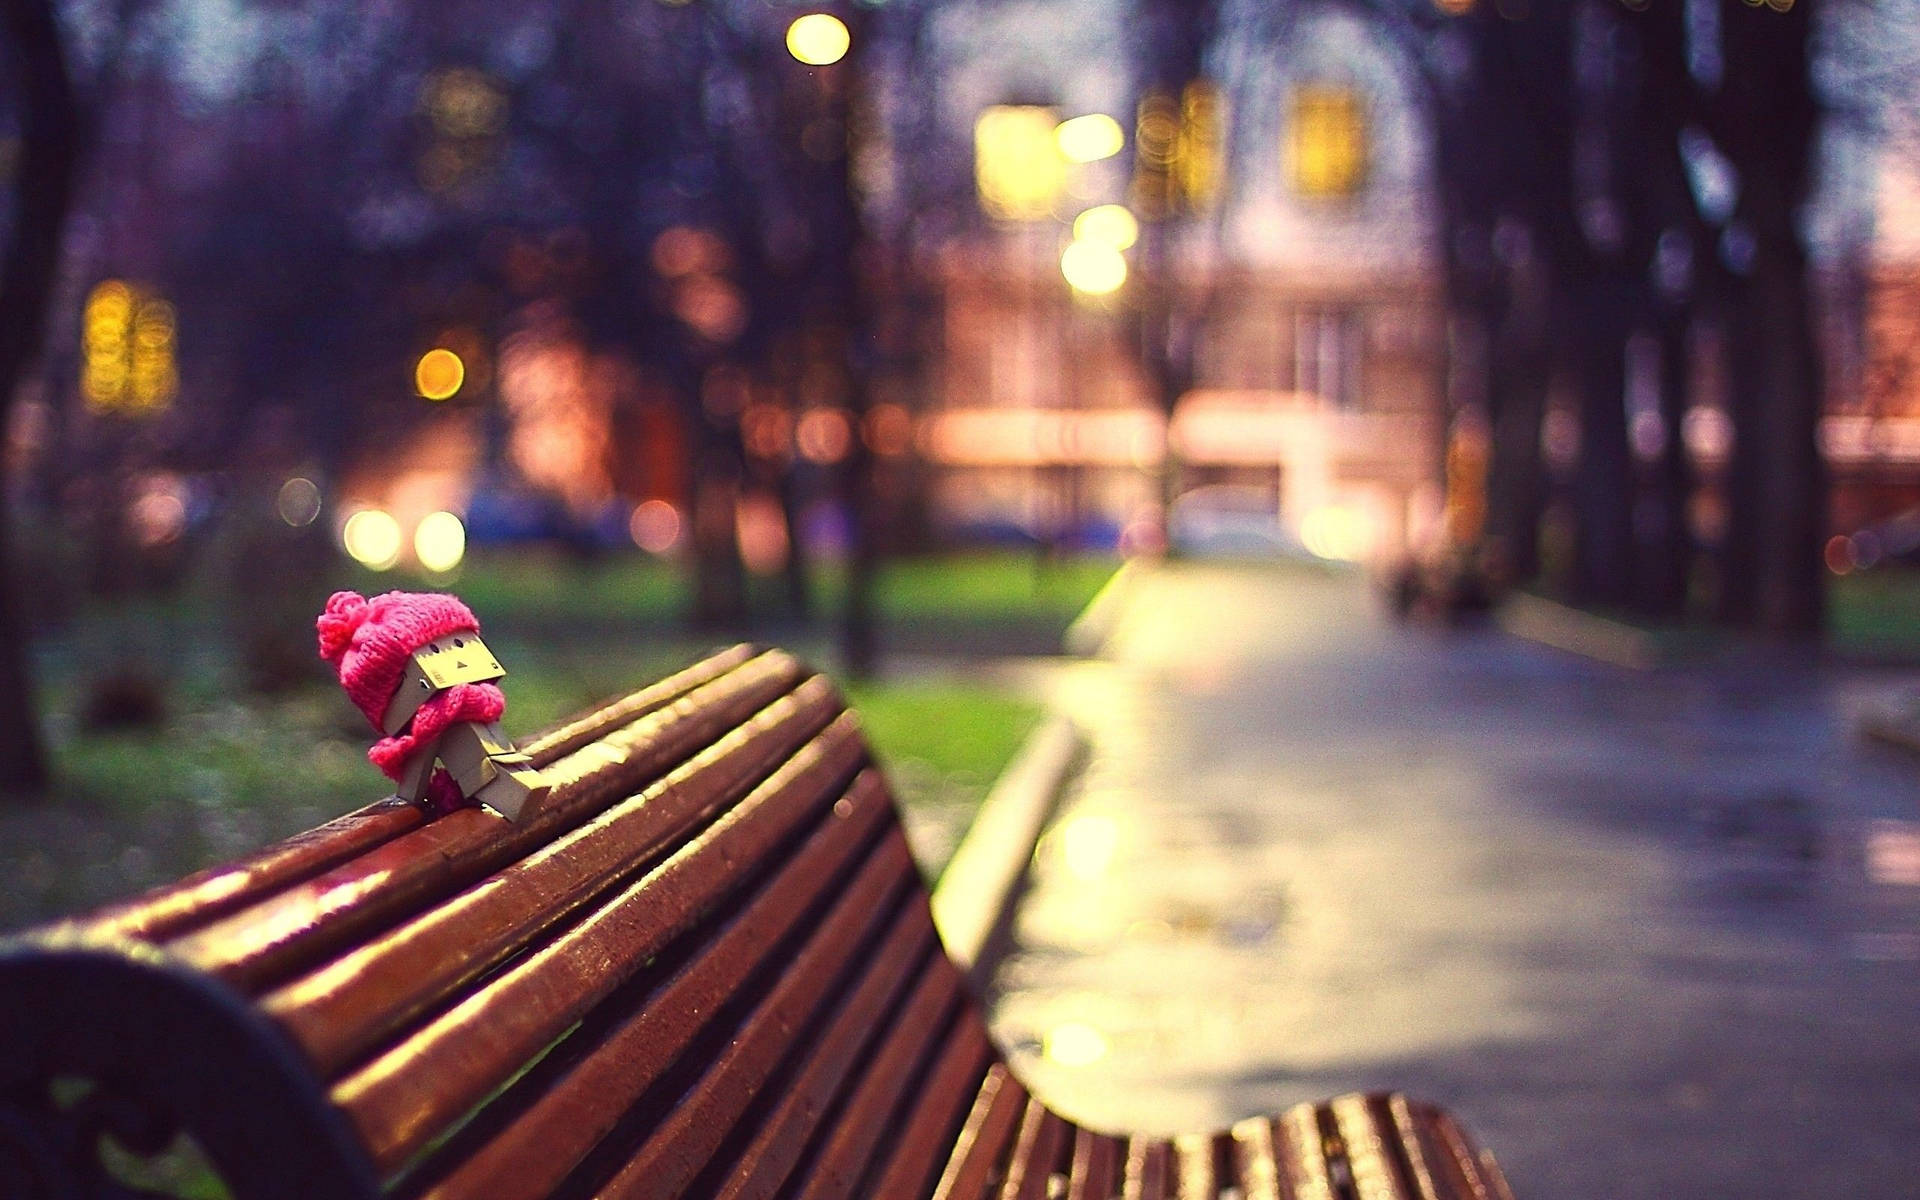 Danbo On Bench Background